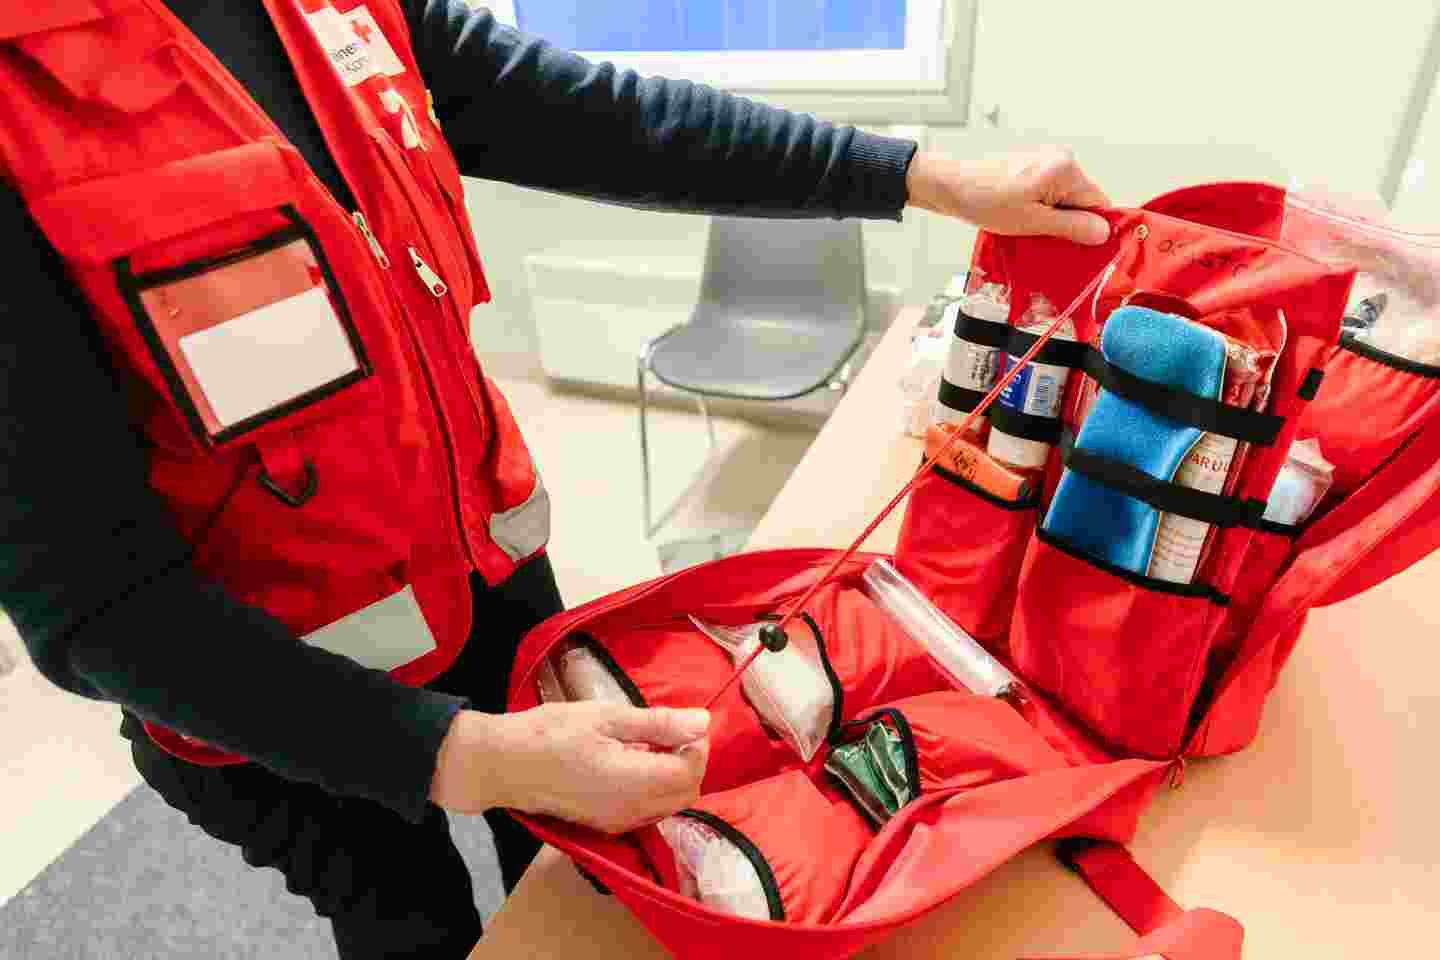 A Red Cross volunteer with an open first aid case.